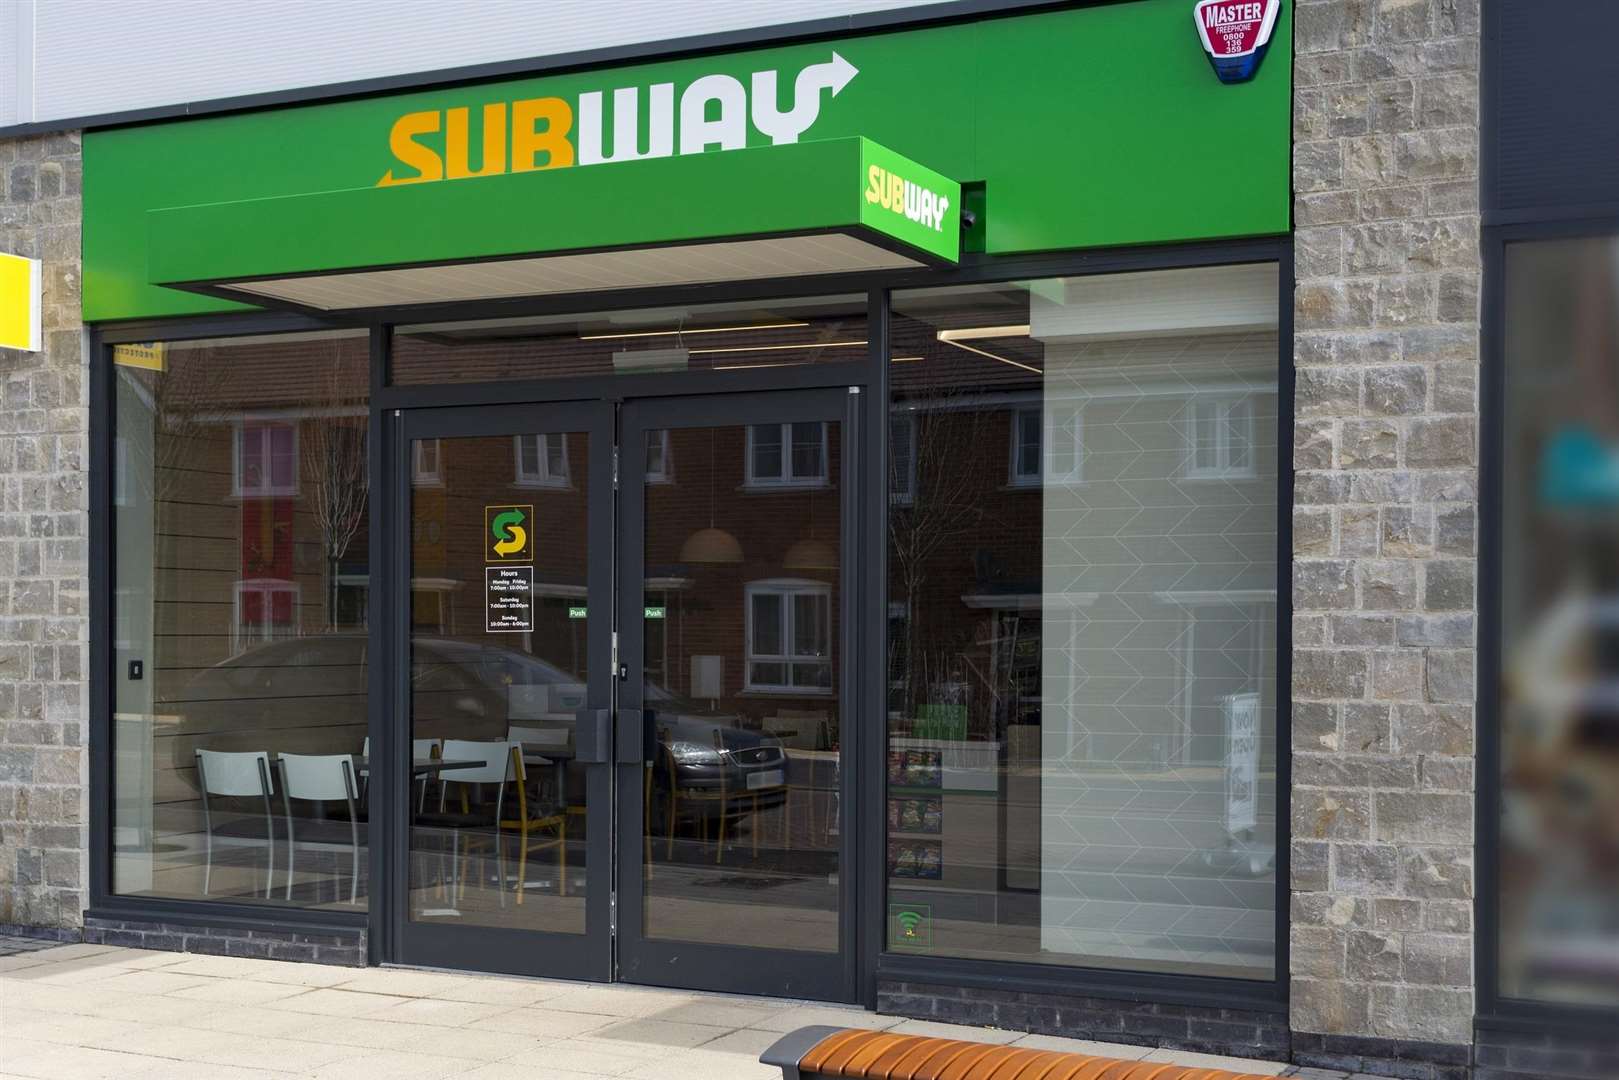 The new Subway store in Maidstone (1436807)